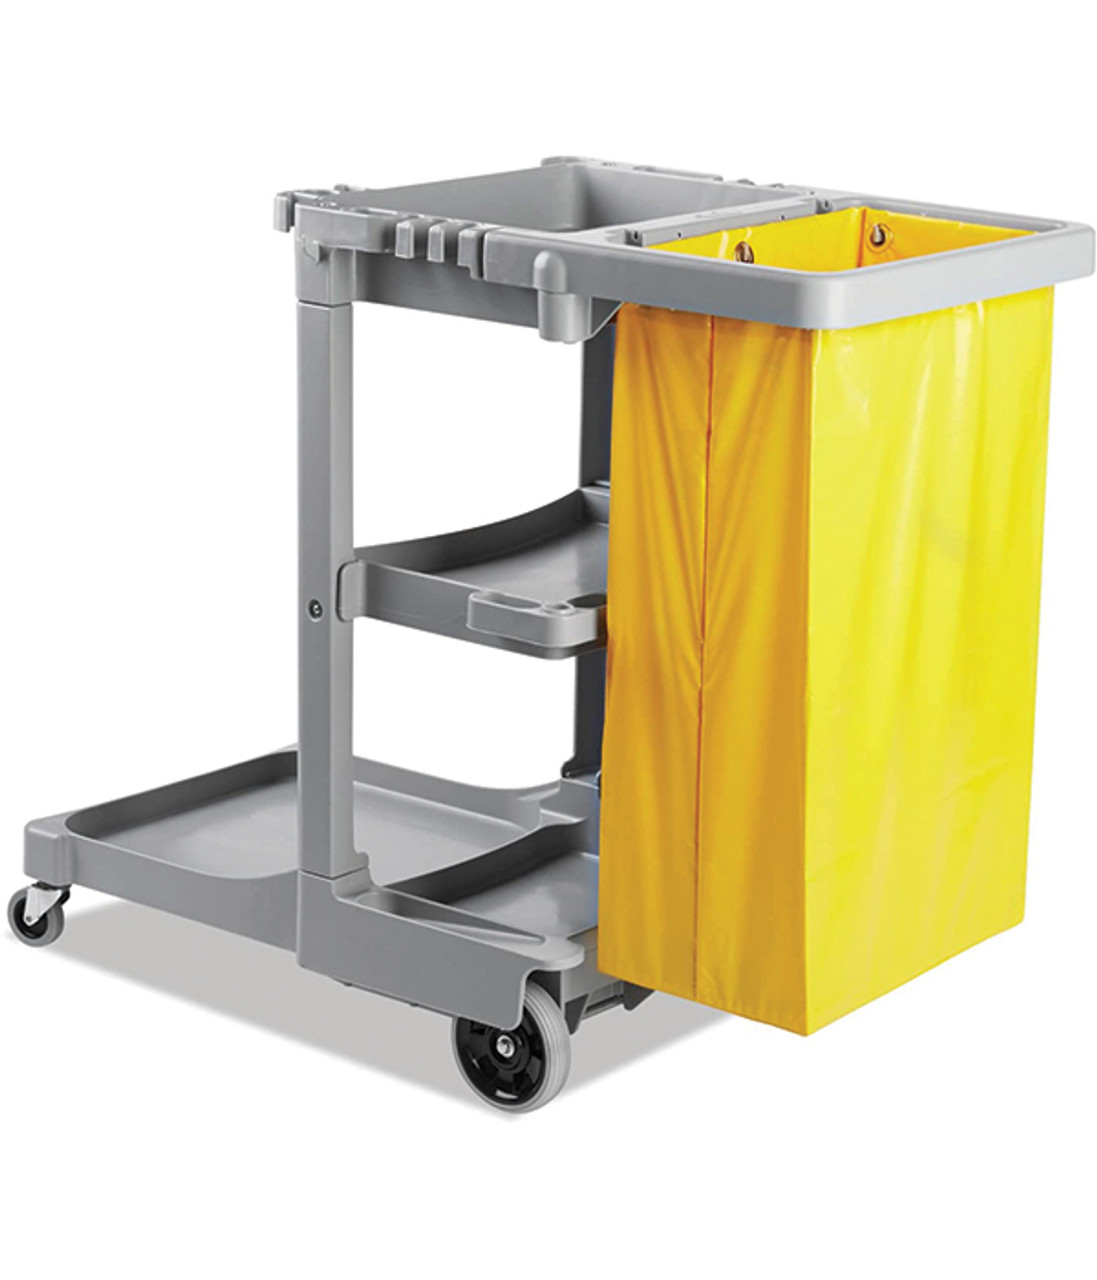 Yellow vinyl bag is ideal for either waste or linen collection and is durable and easy to clean. 